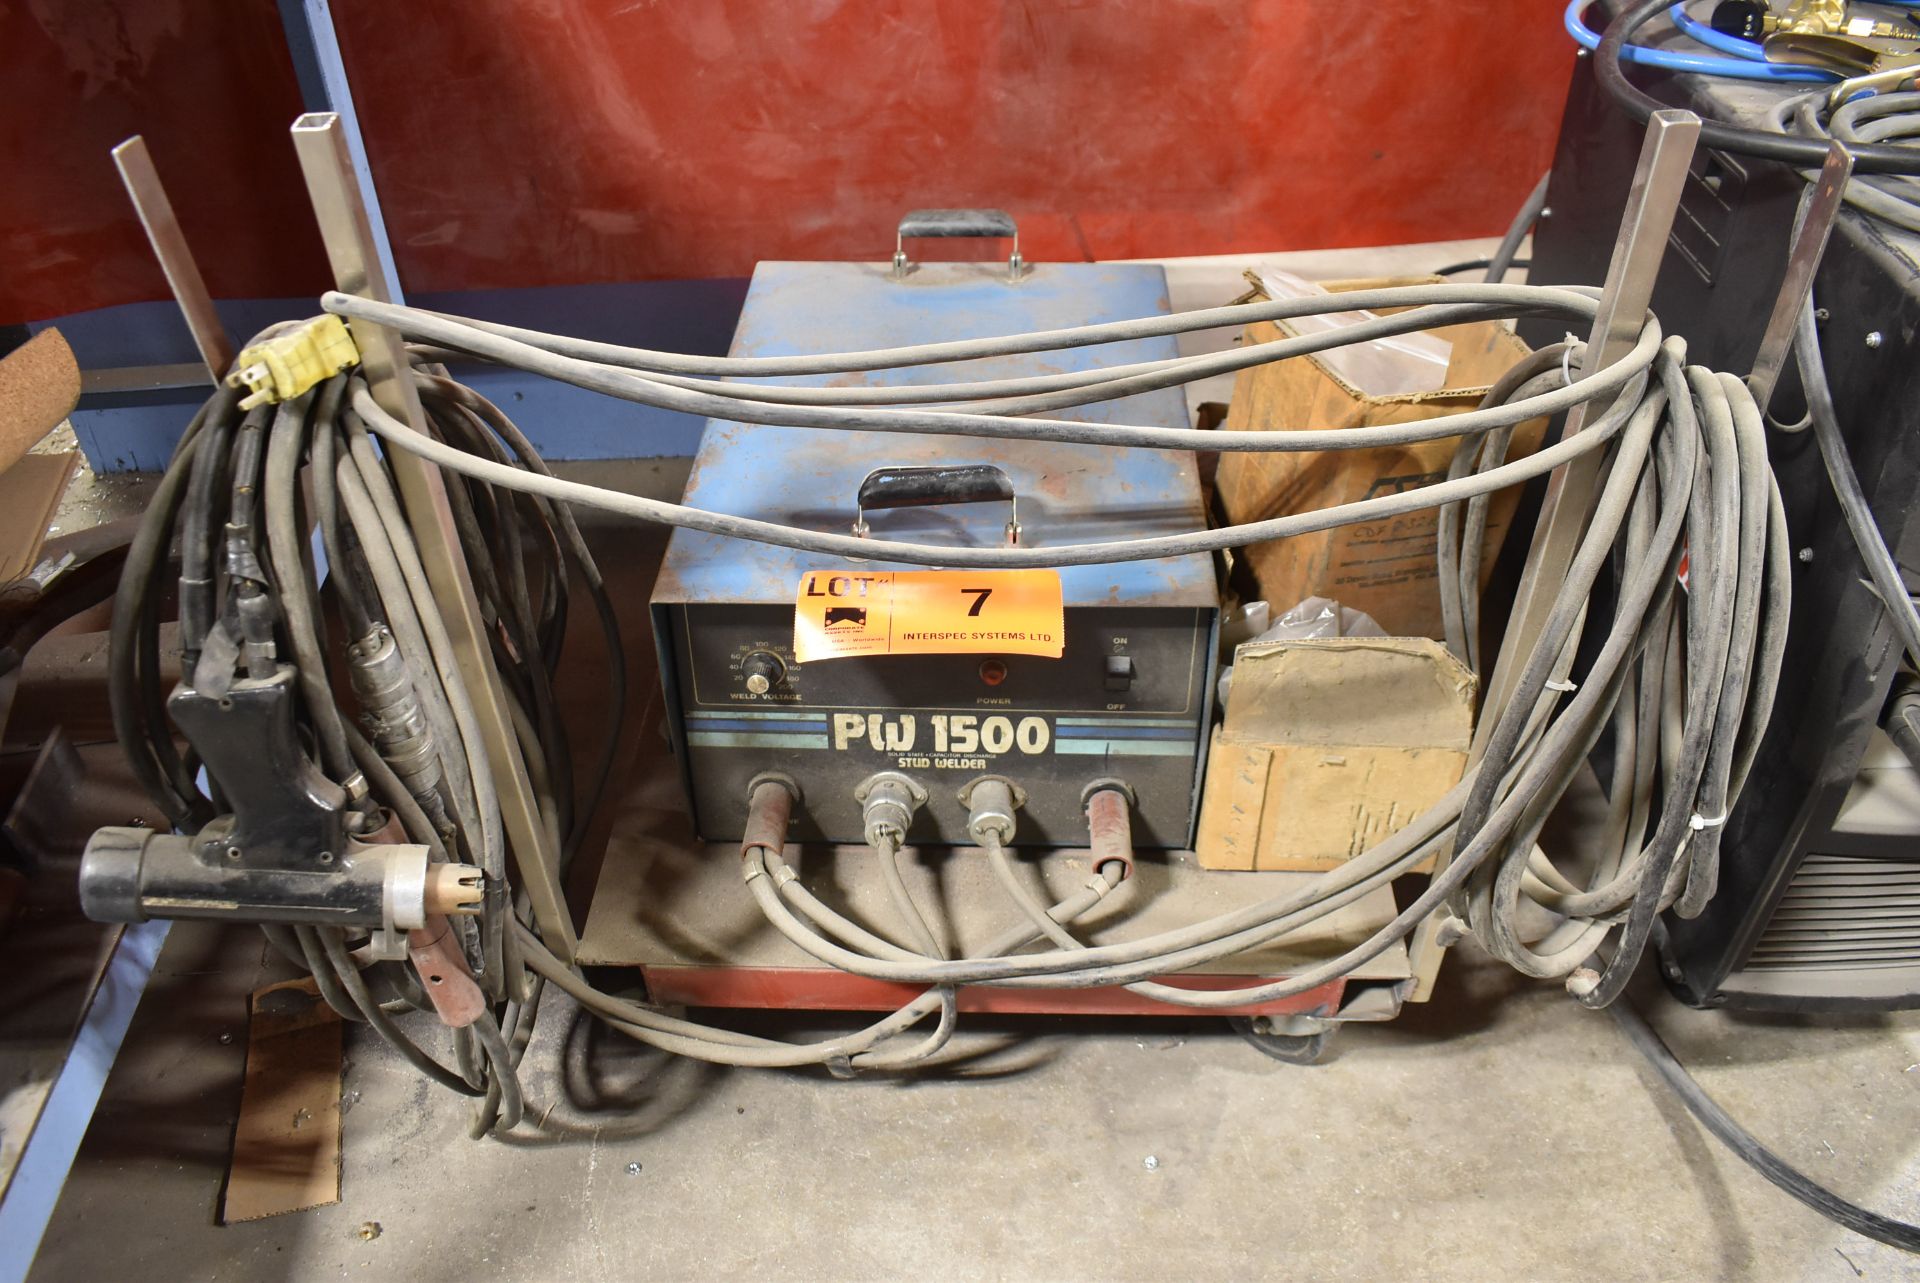 ERICO JONES PW1500 STUD WELDER WITH CABLES AND GUN S/N 183140 [RIGGING FOR FOR LOT #7 - $25 CAD PLUS